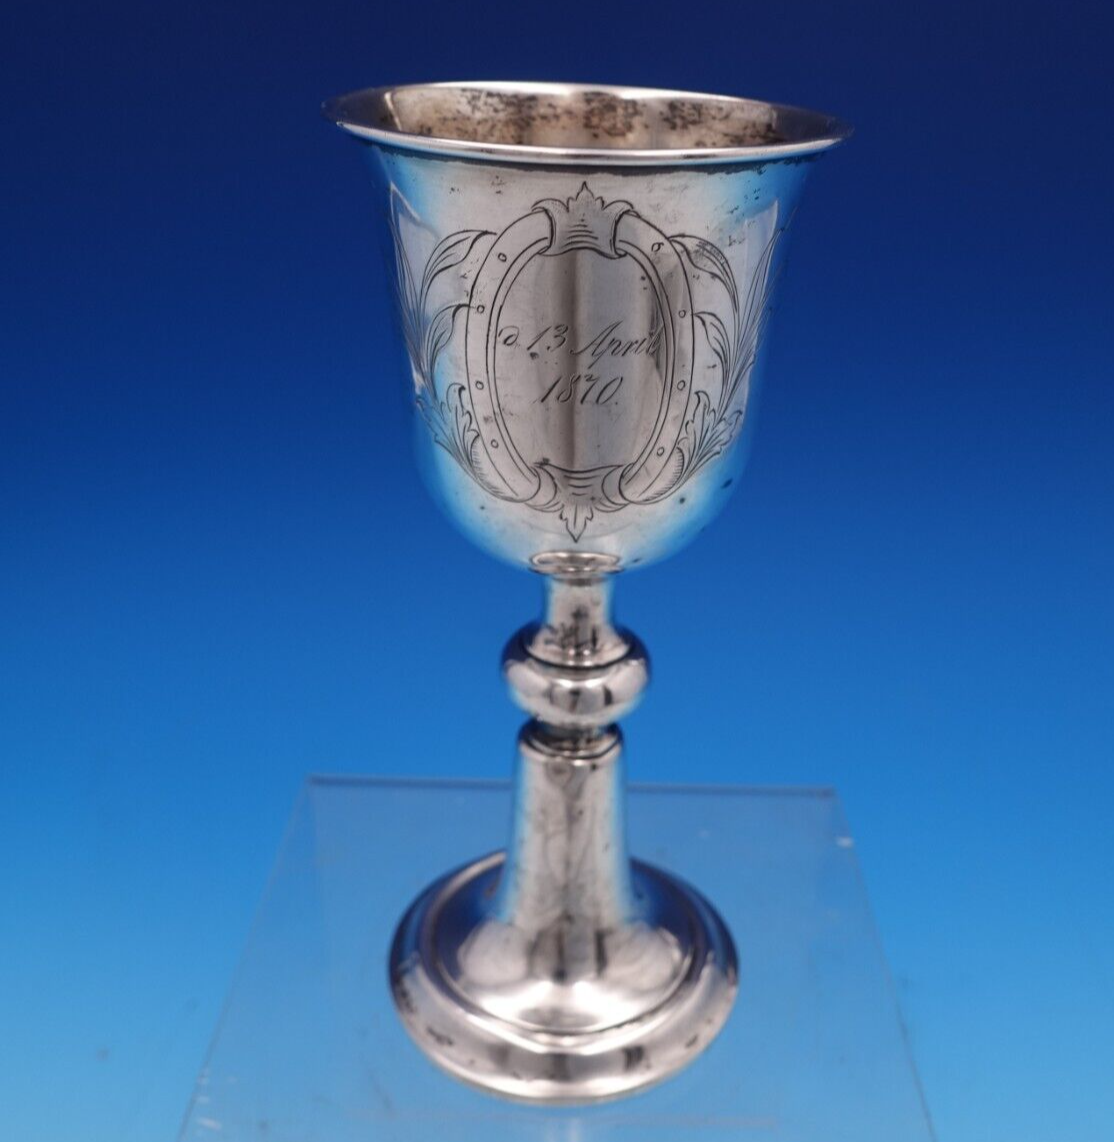 Primary image for Danish .830 Silver Cup / Goblet w/ Engraved Crest Scrollwork 6" x 2 3/4" (#7613)